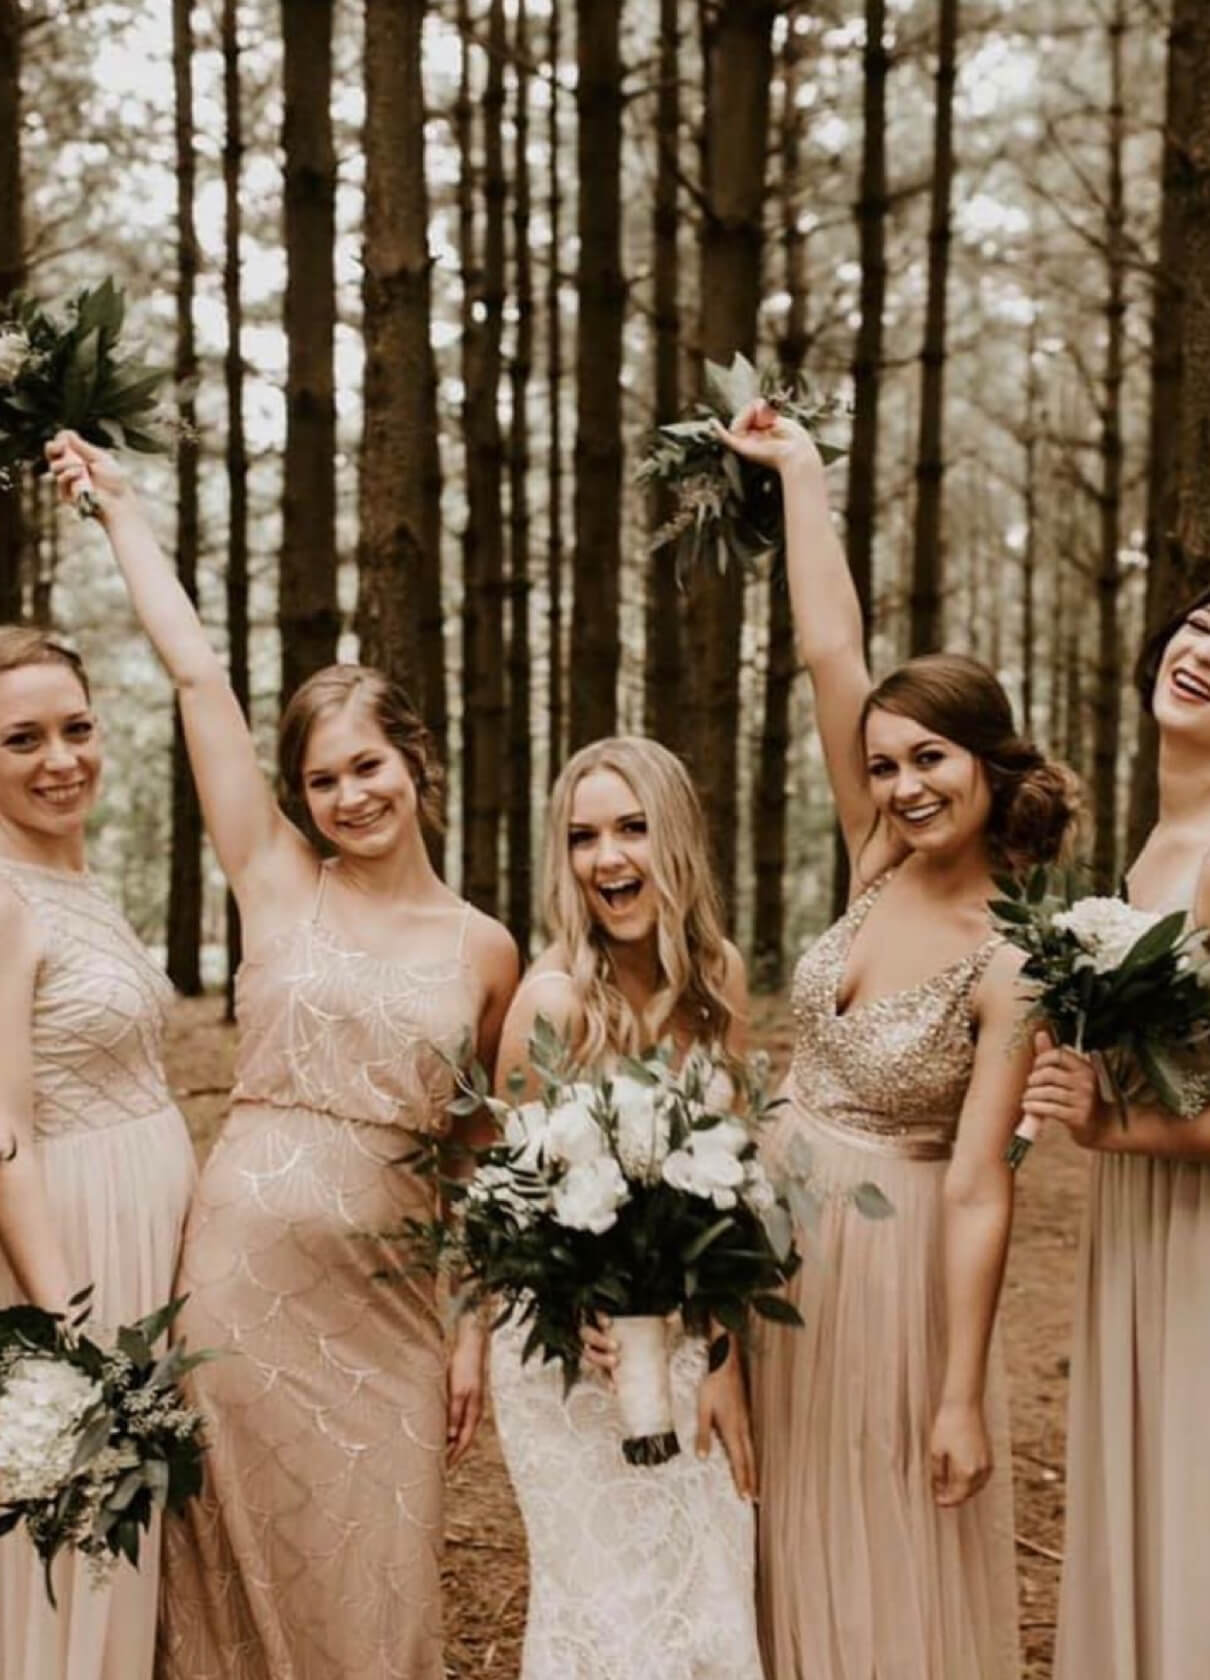 Bride holding floral bouquet with her bridesmaids